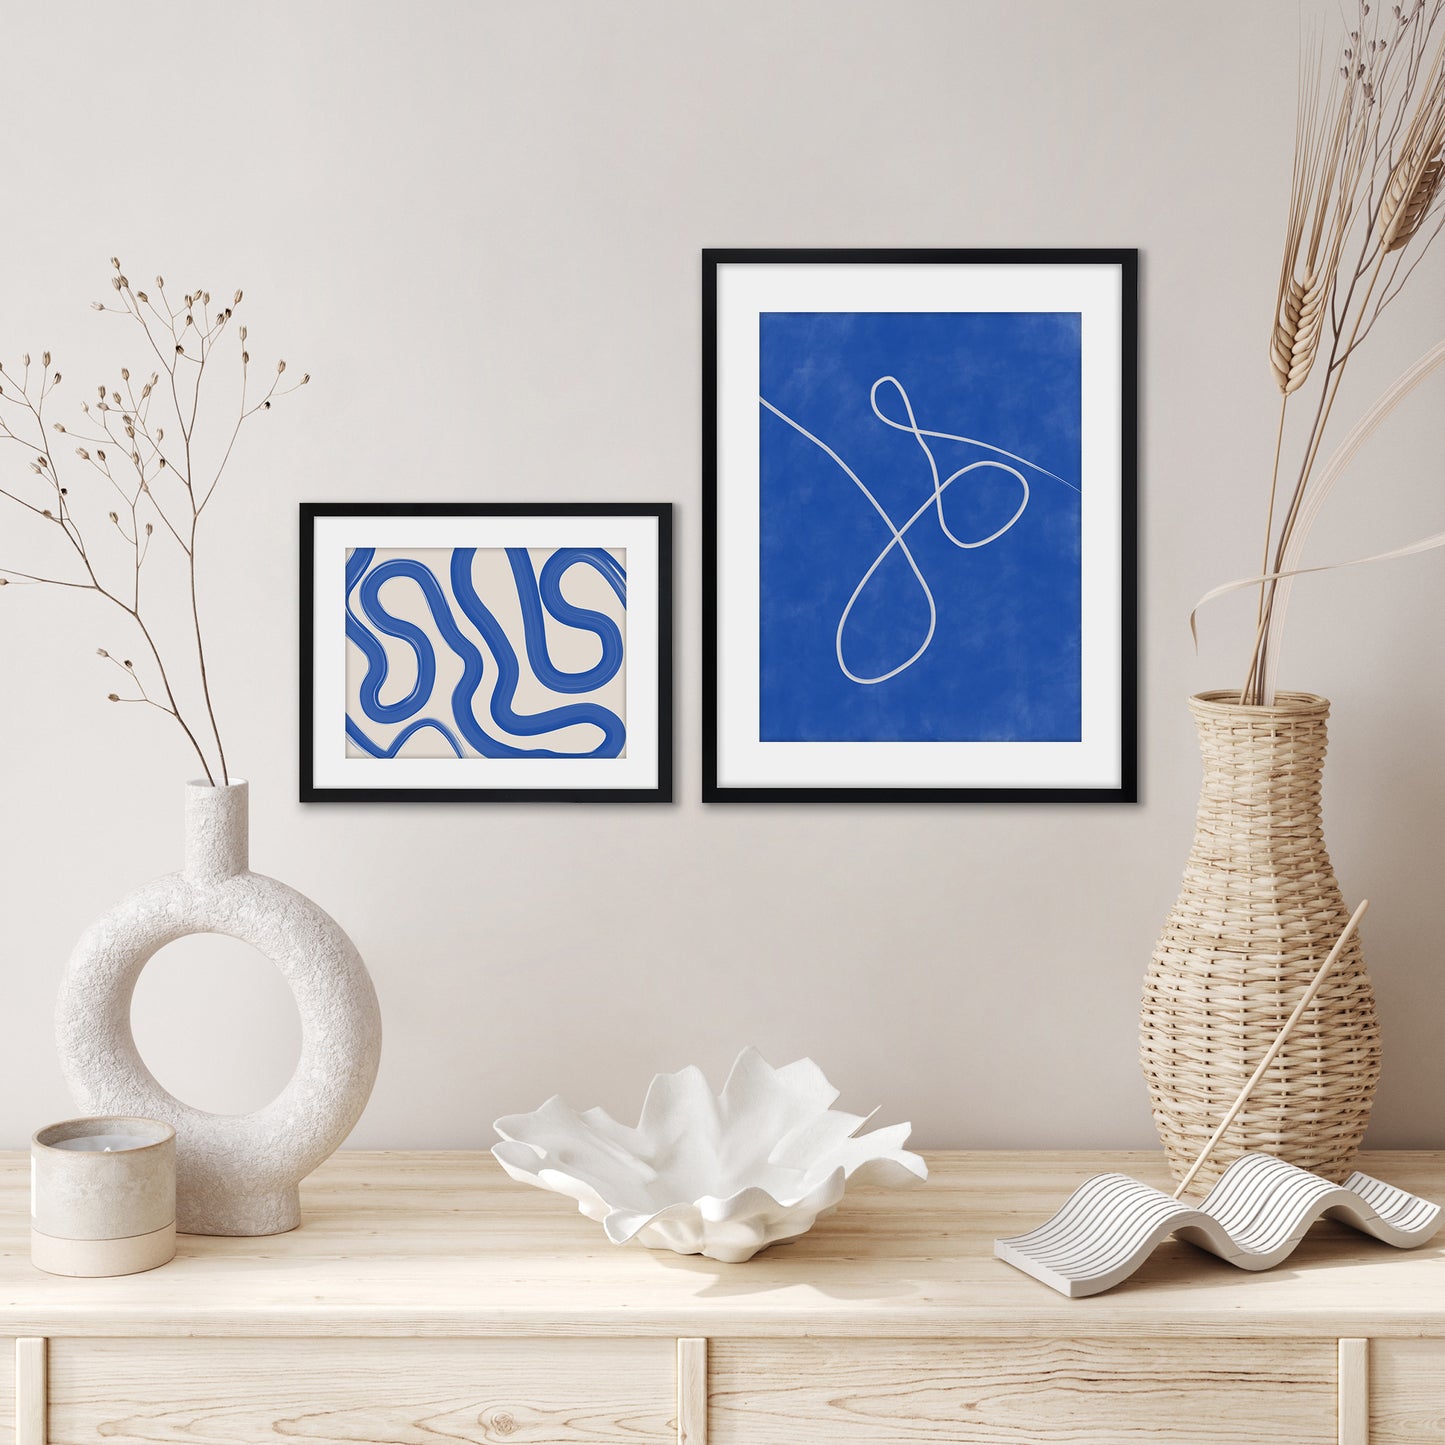 Americanflat Colbalt Blue Continuous Line Drawing by The Print Republic - 2 Piece Set